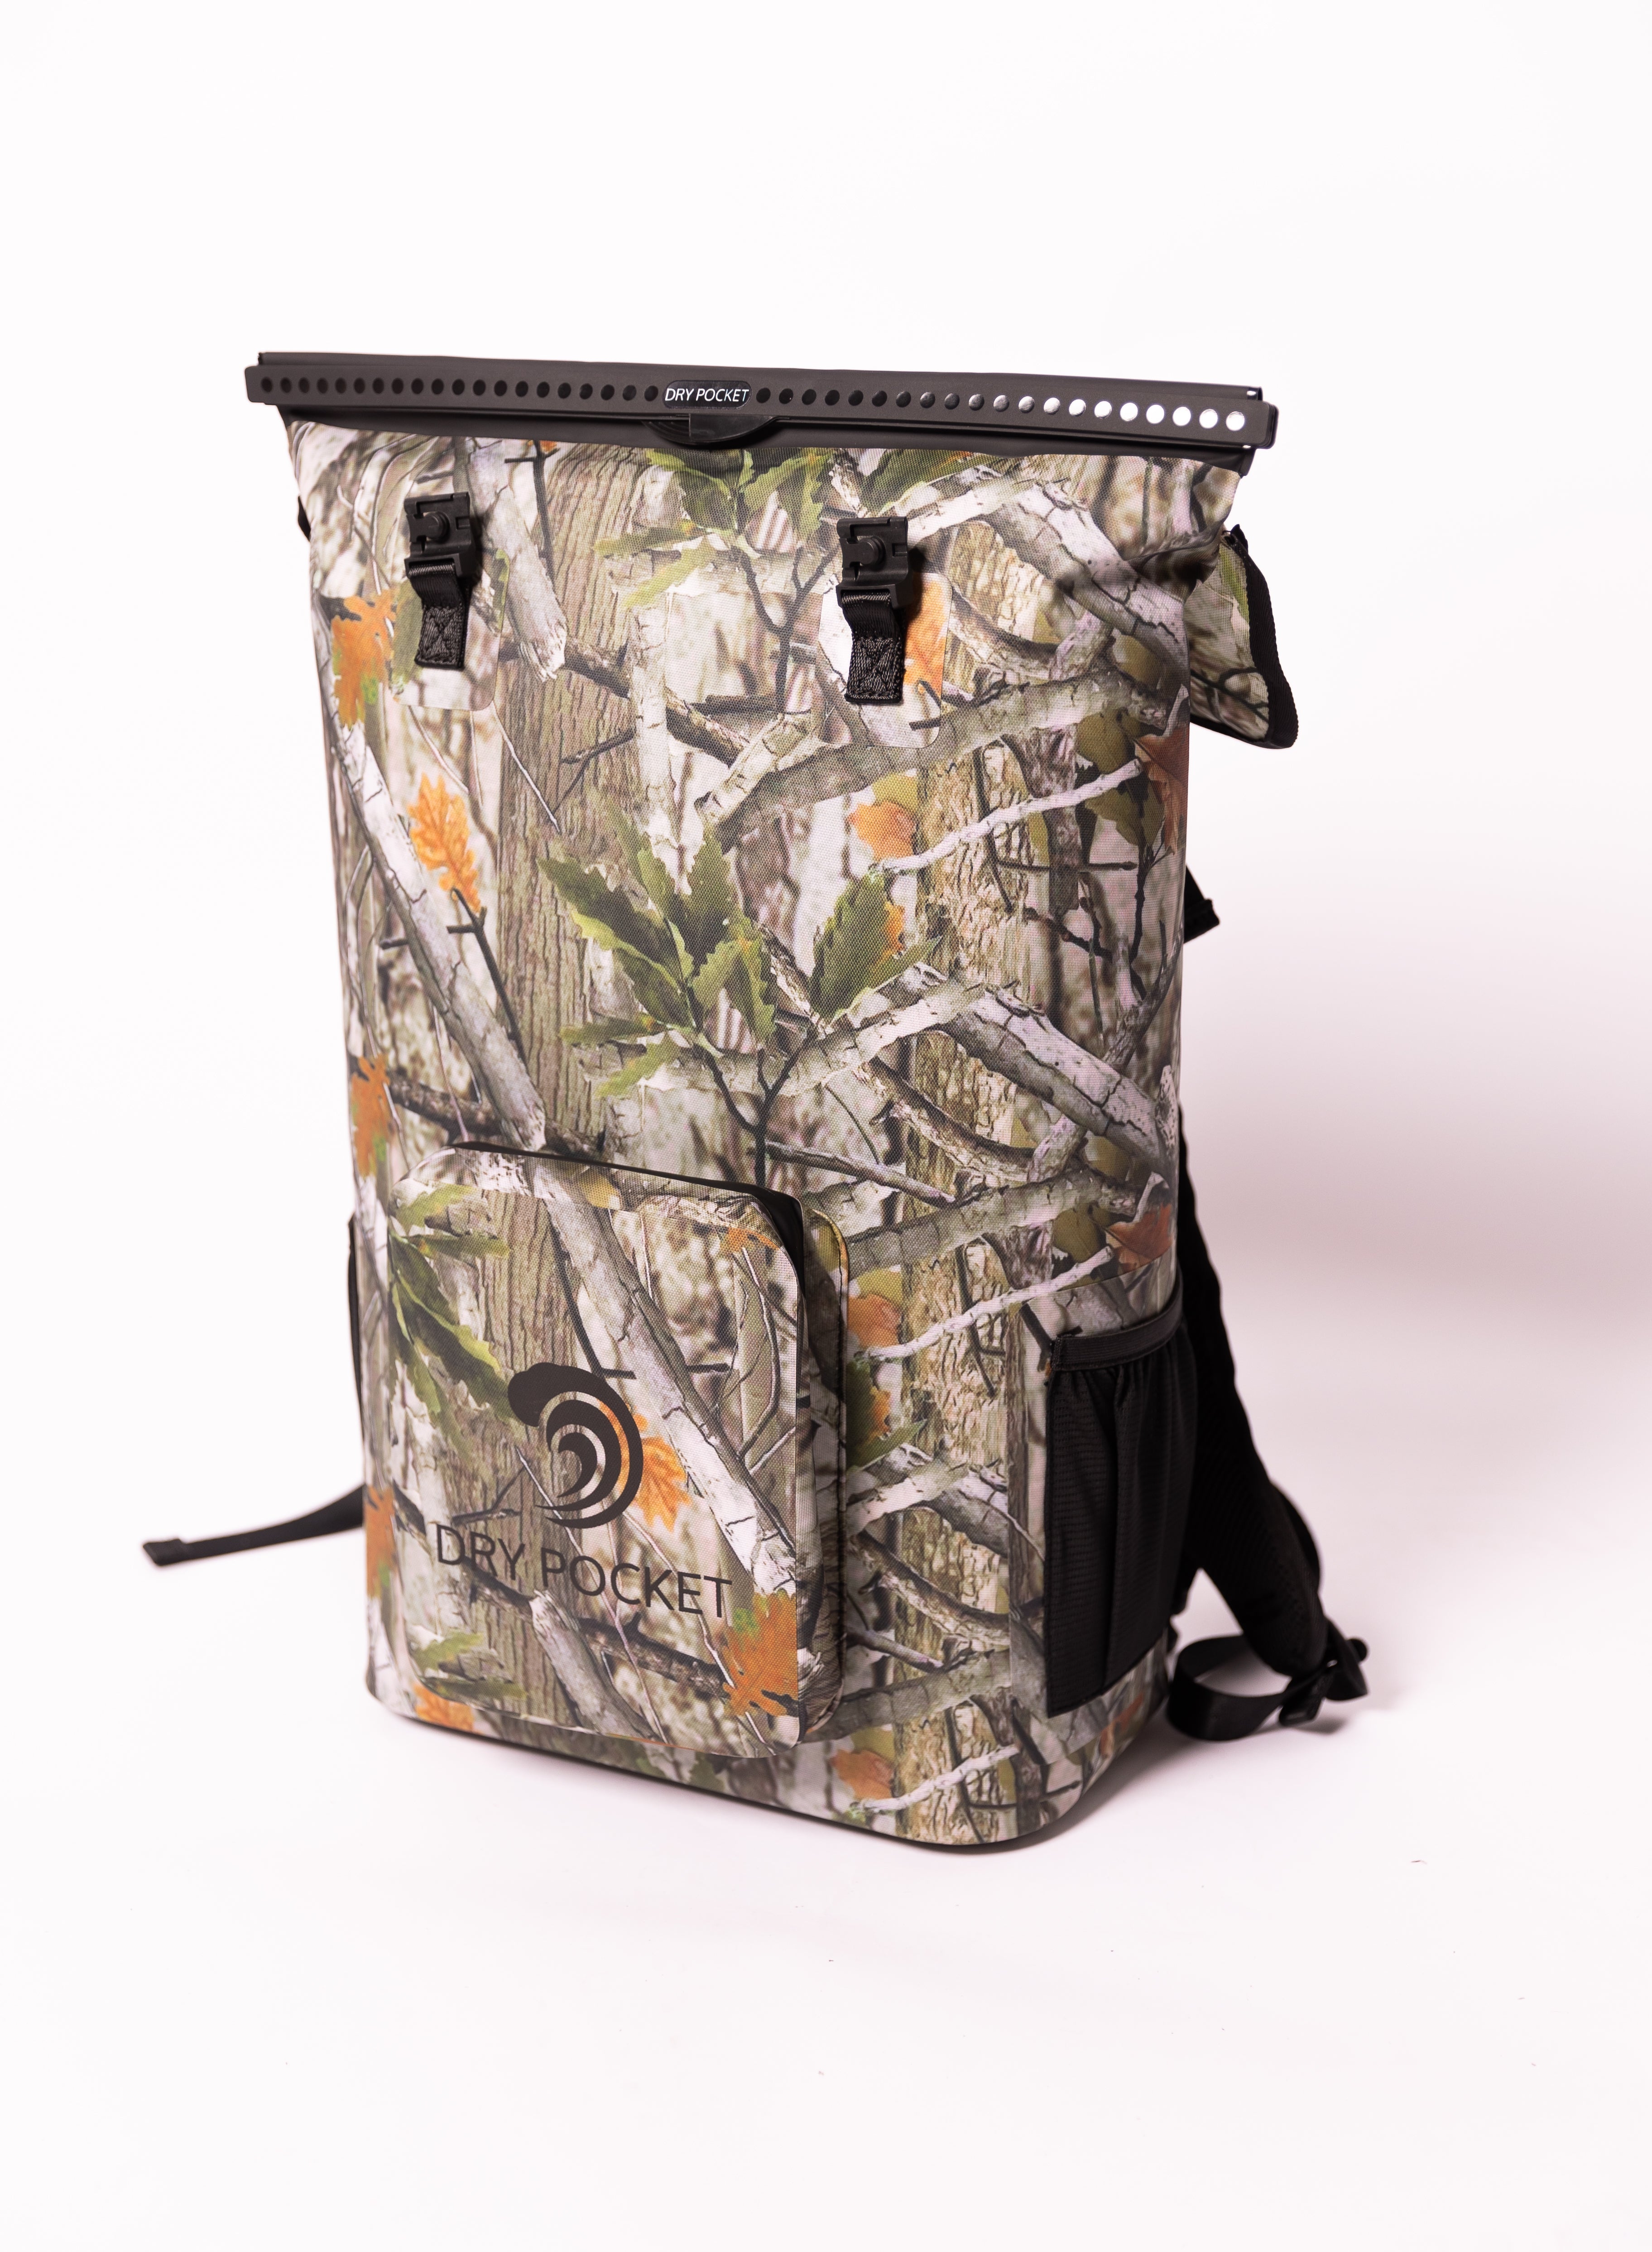 Automatic Self Sealing Backpack Cooler - Dry Pocket Apparel